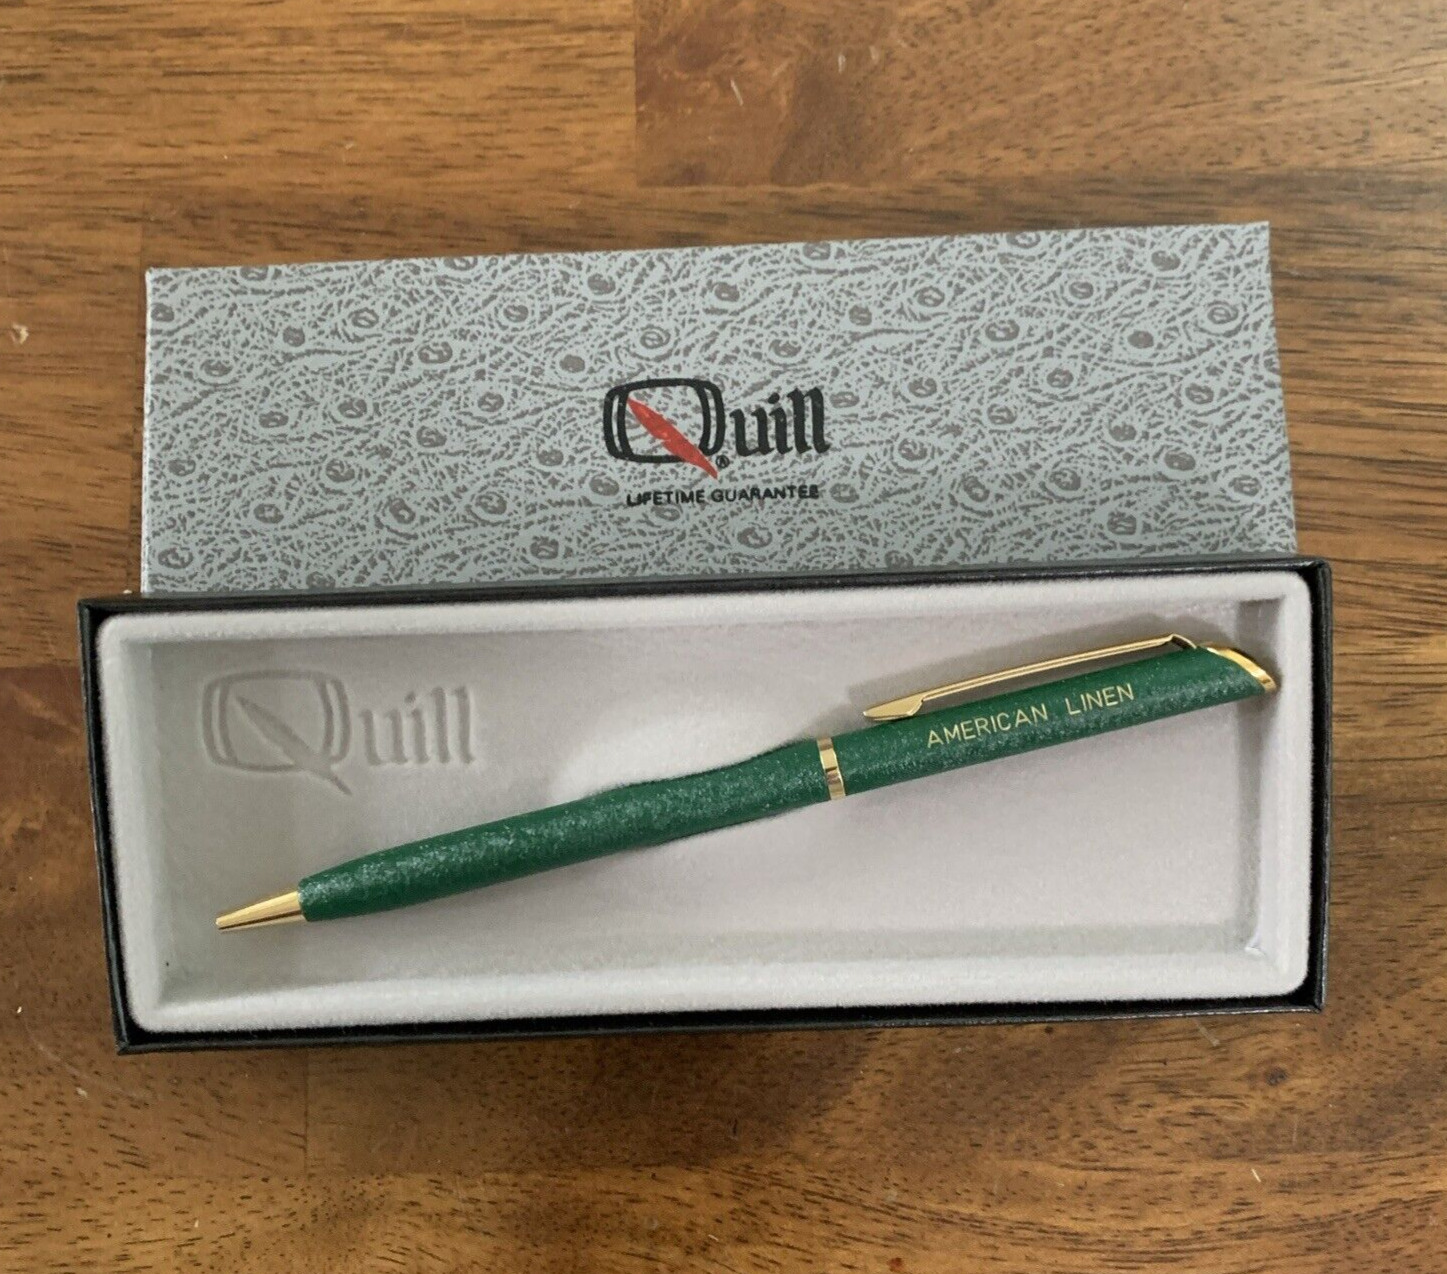 Quill American Linen Ball Point Pen New Old Stock